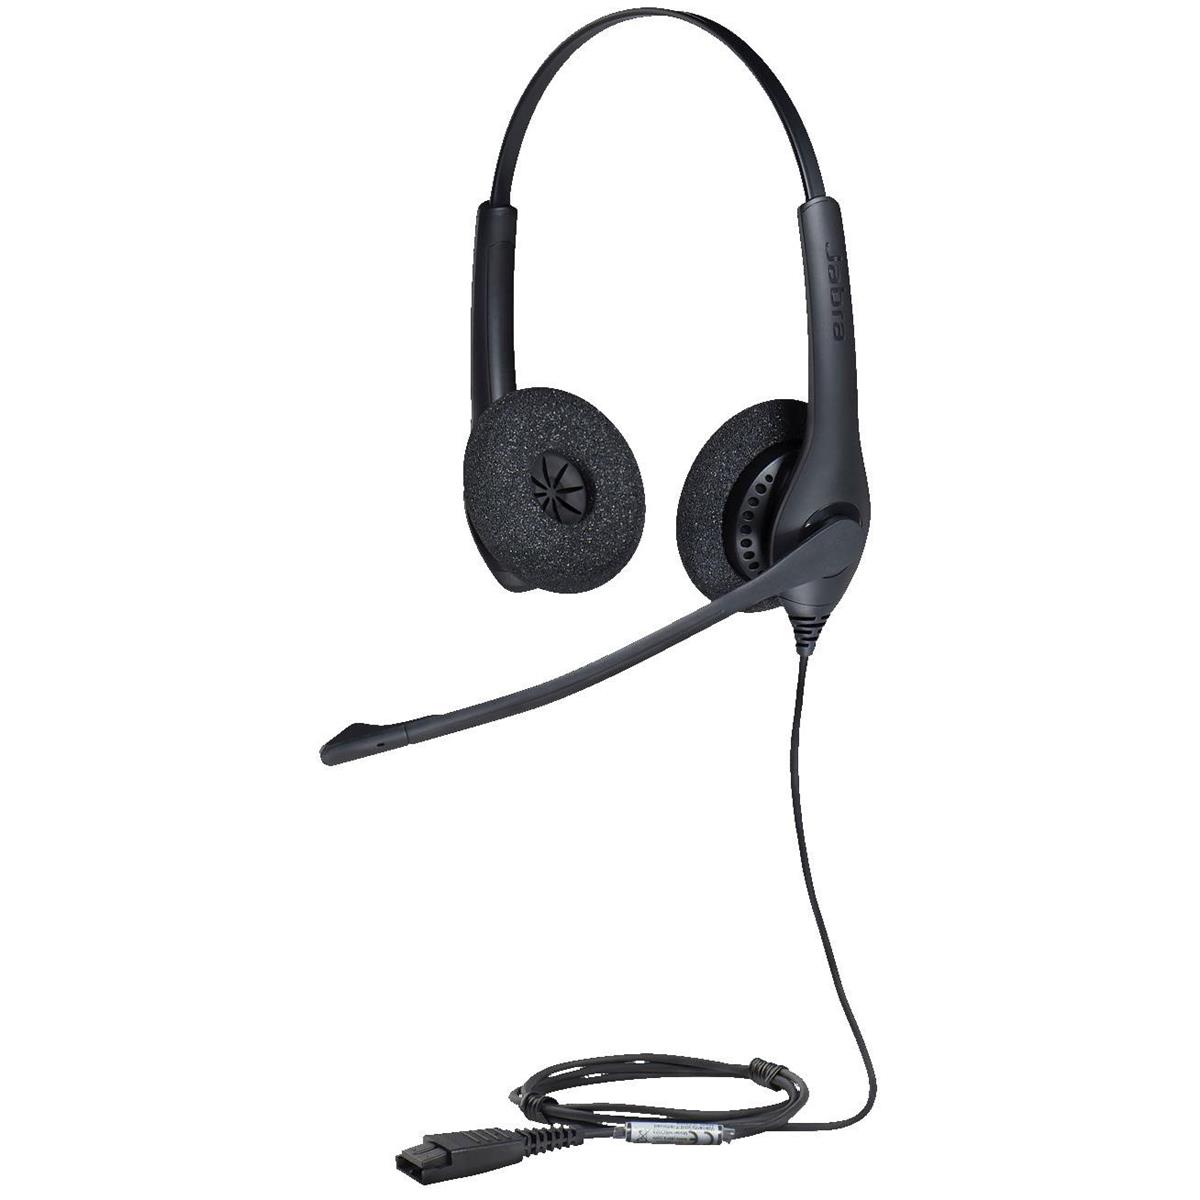 Image of Jabra Biz 1500 USB Duo Headset with Noise Cancelling Microphone